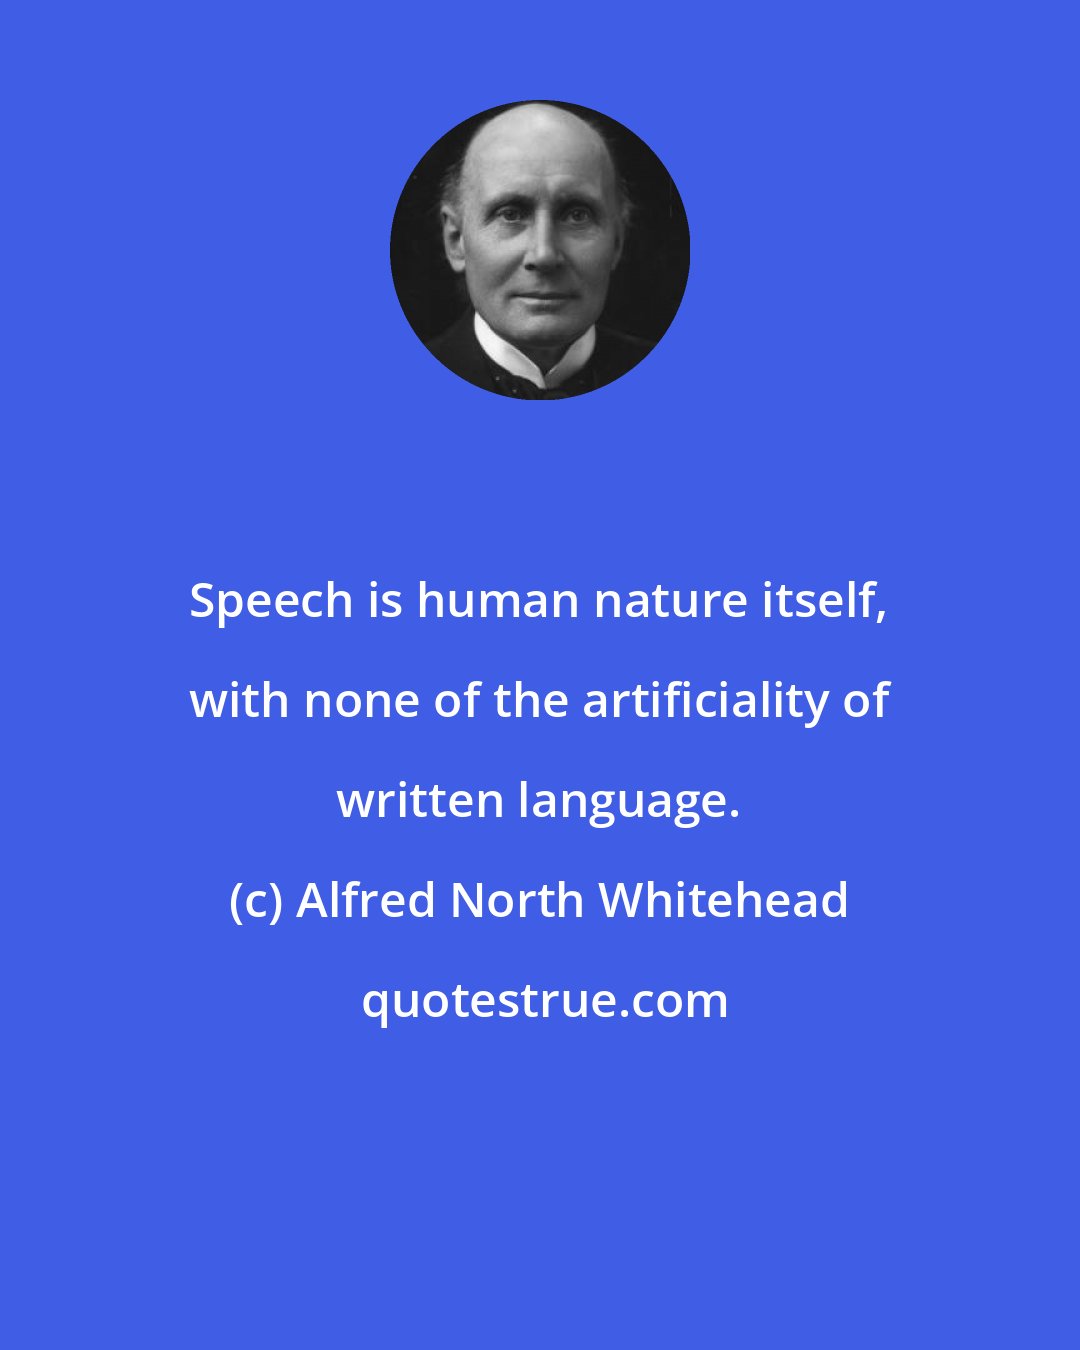 Alfred North Whitehead: Speech is human nature itself, with none of the artificiality of written language.